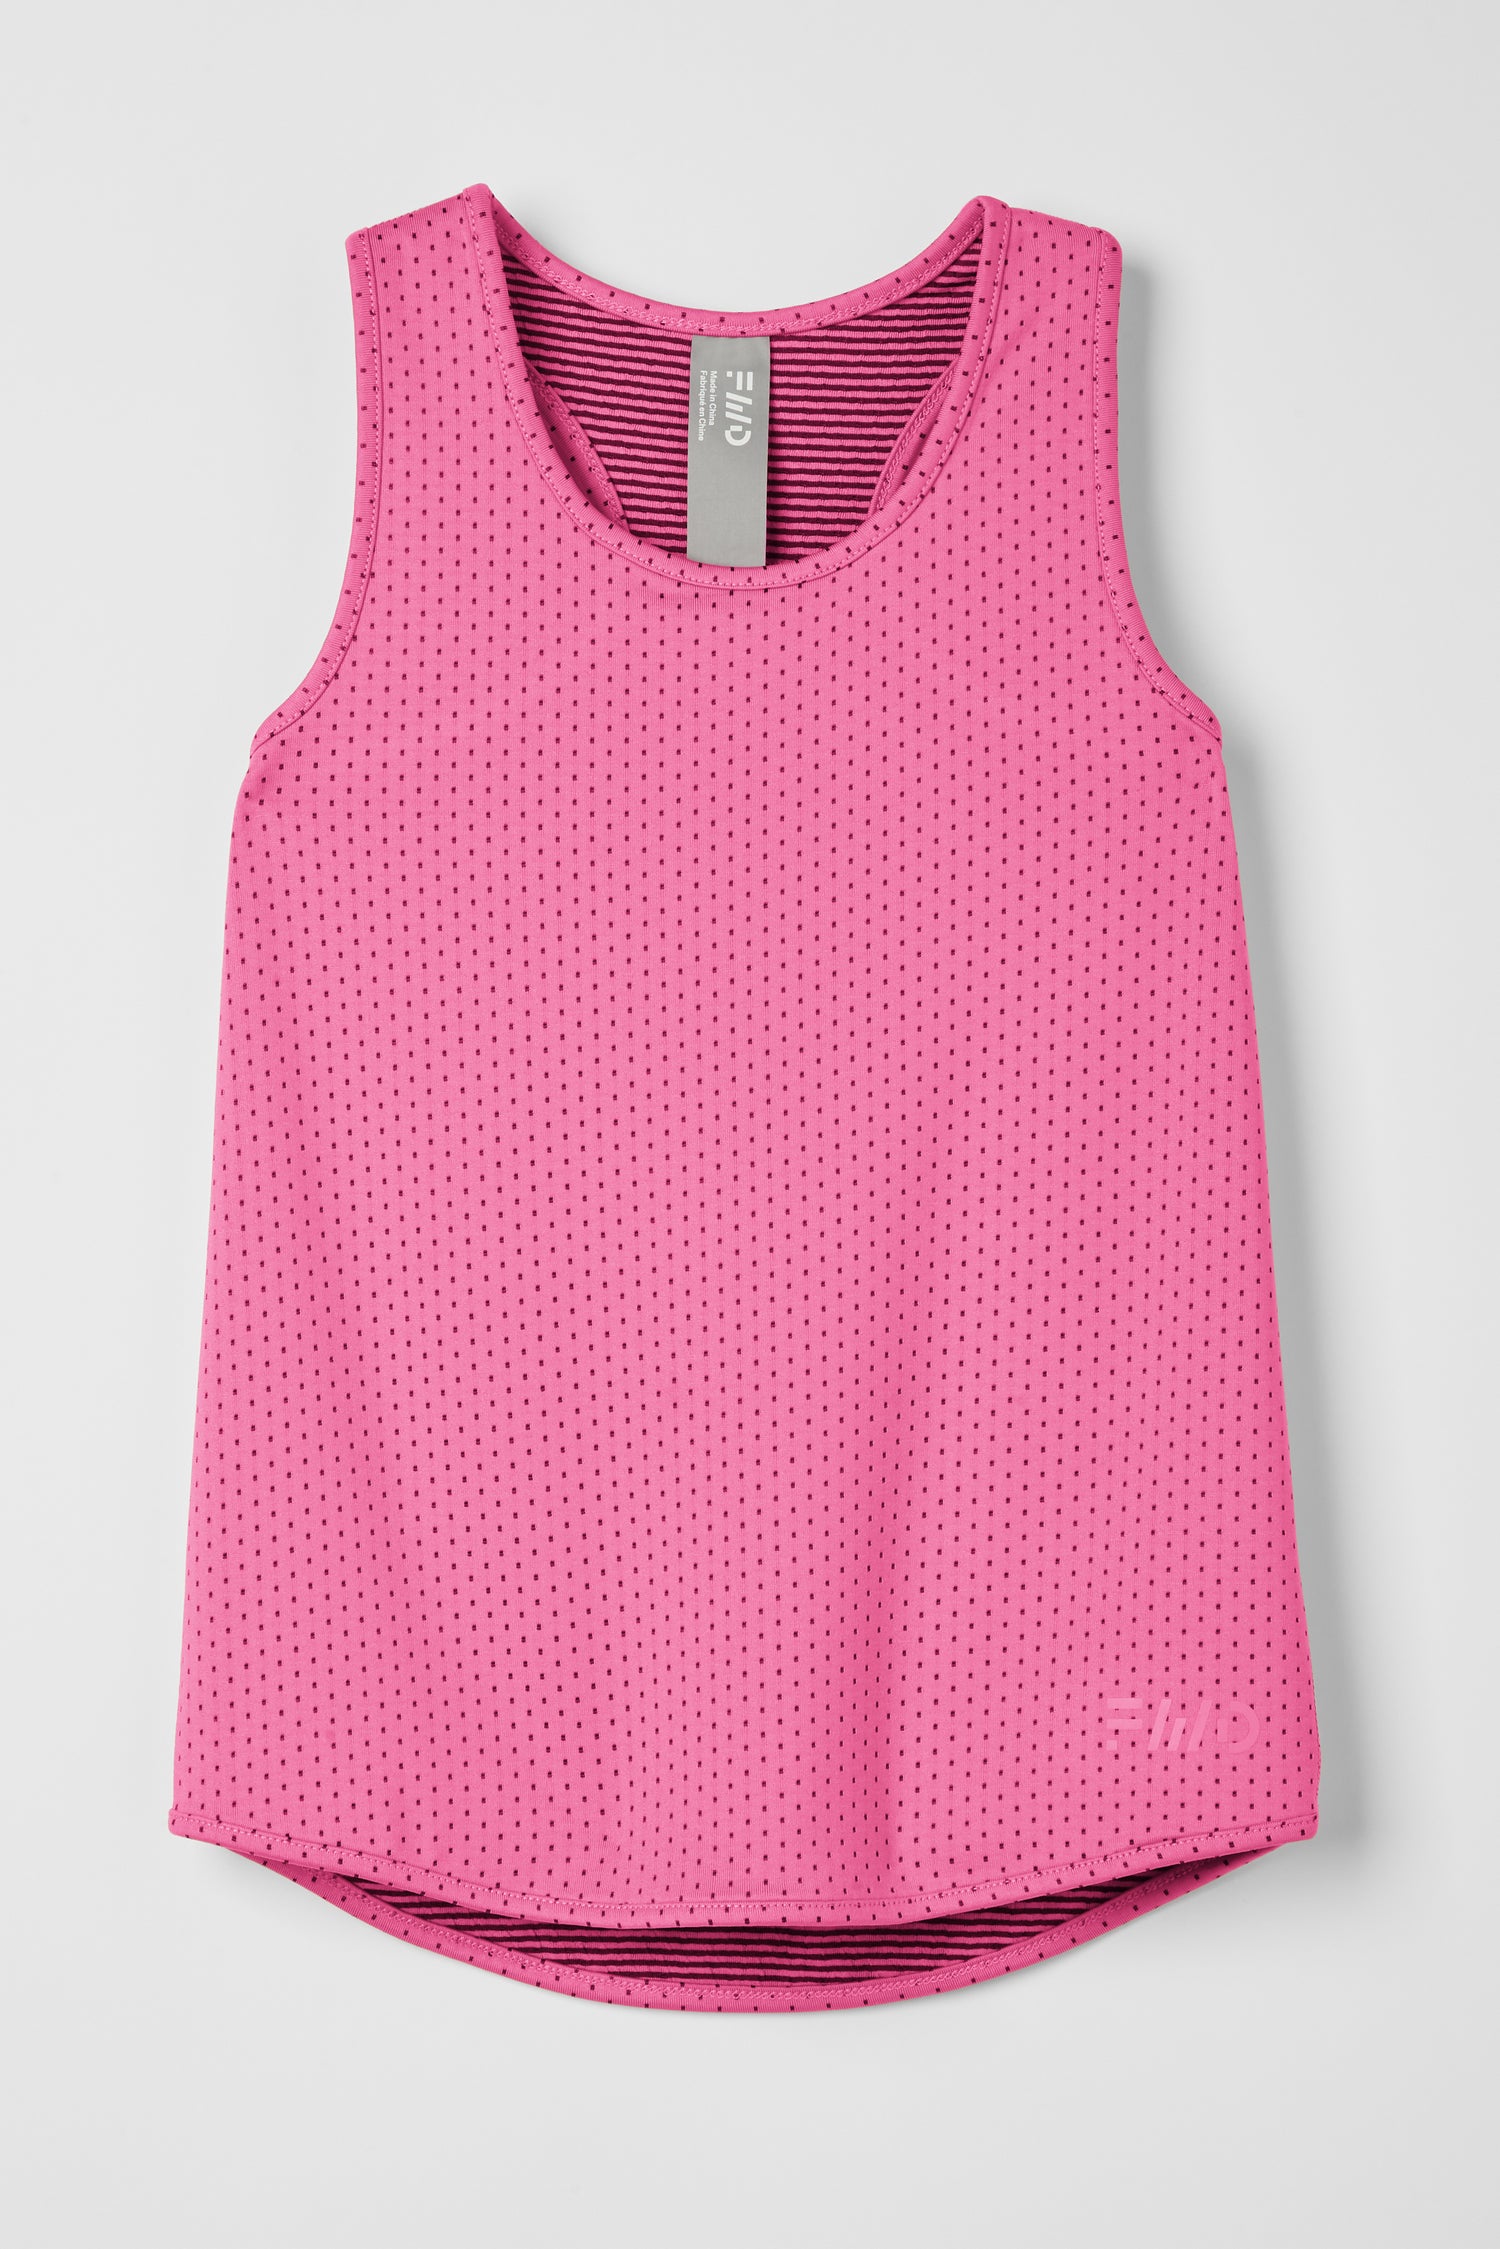 FWD Core Toddler Girls' Reversible Tank - BEST SELLING